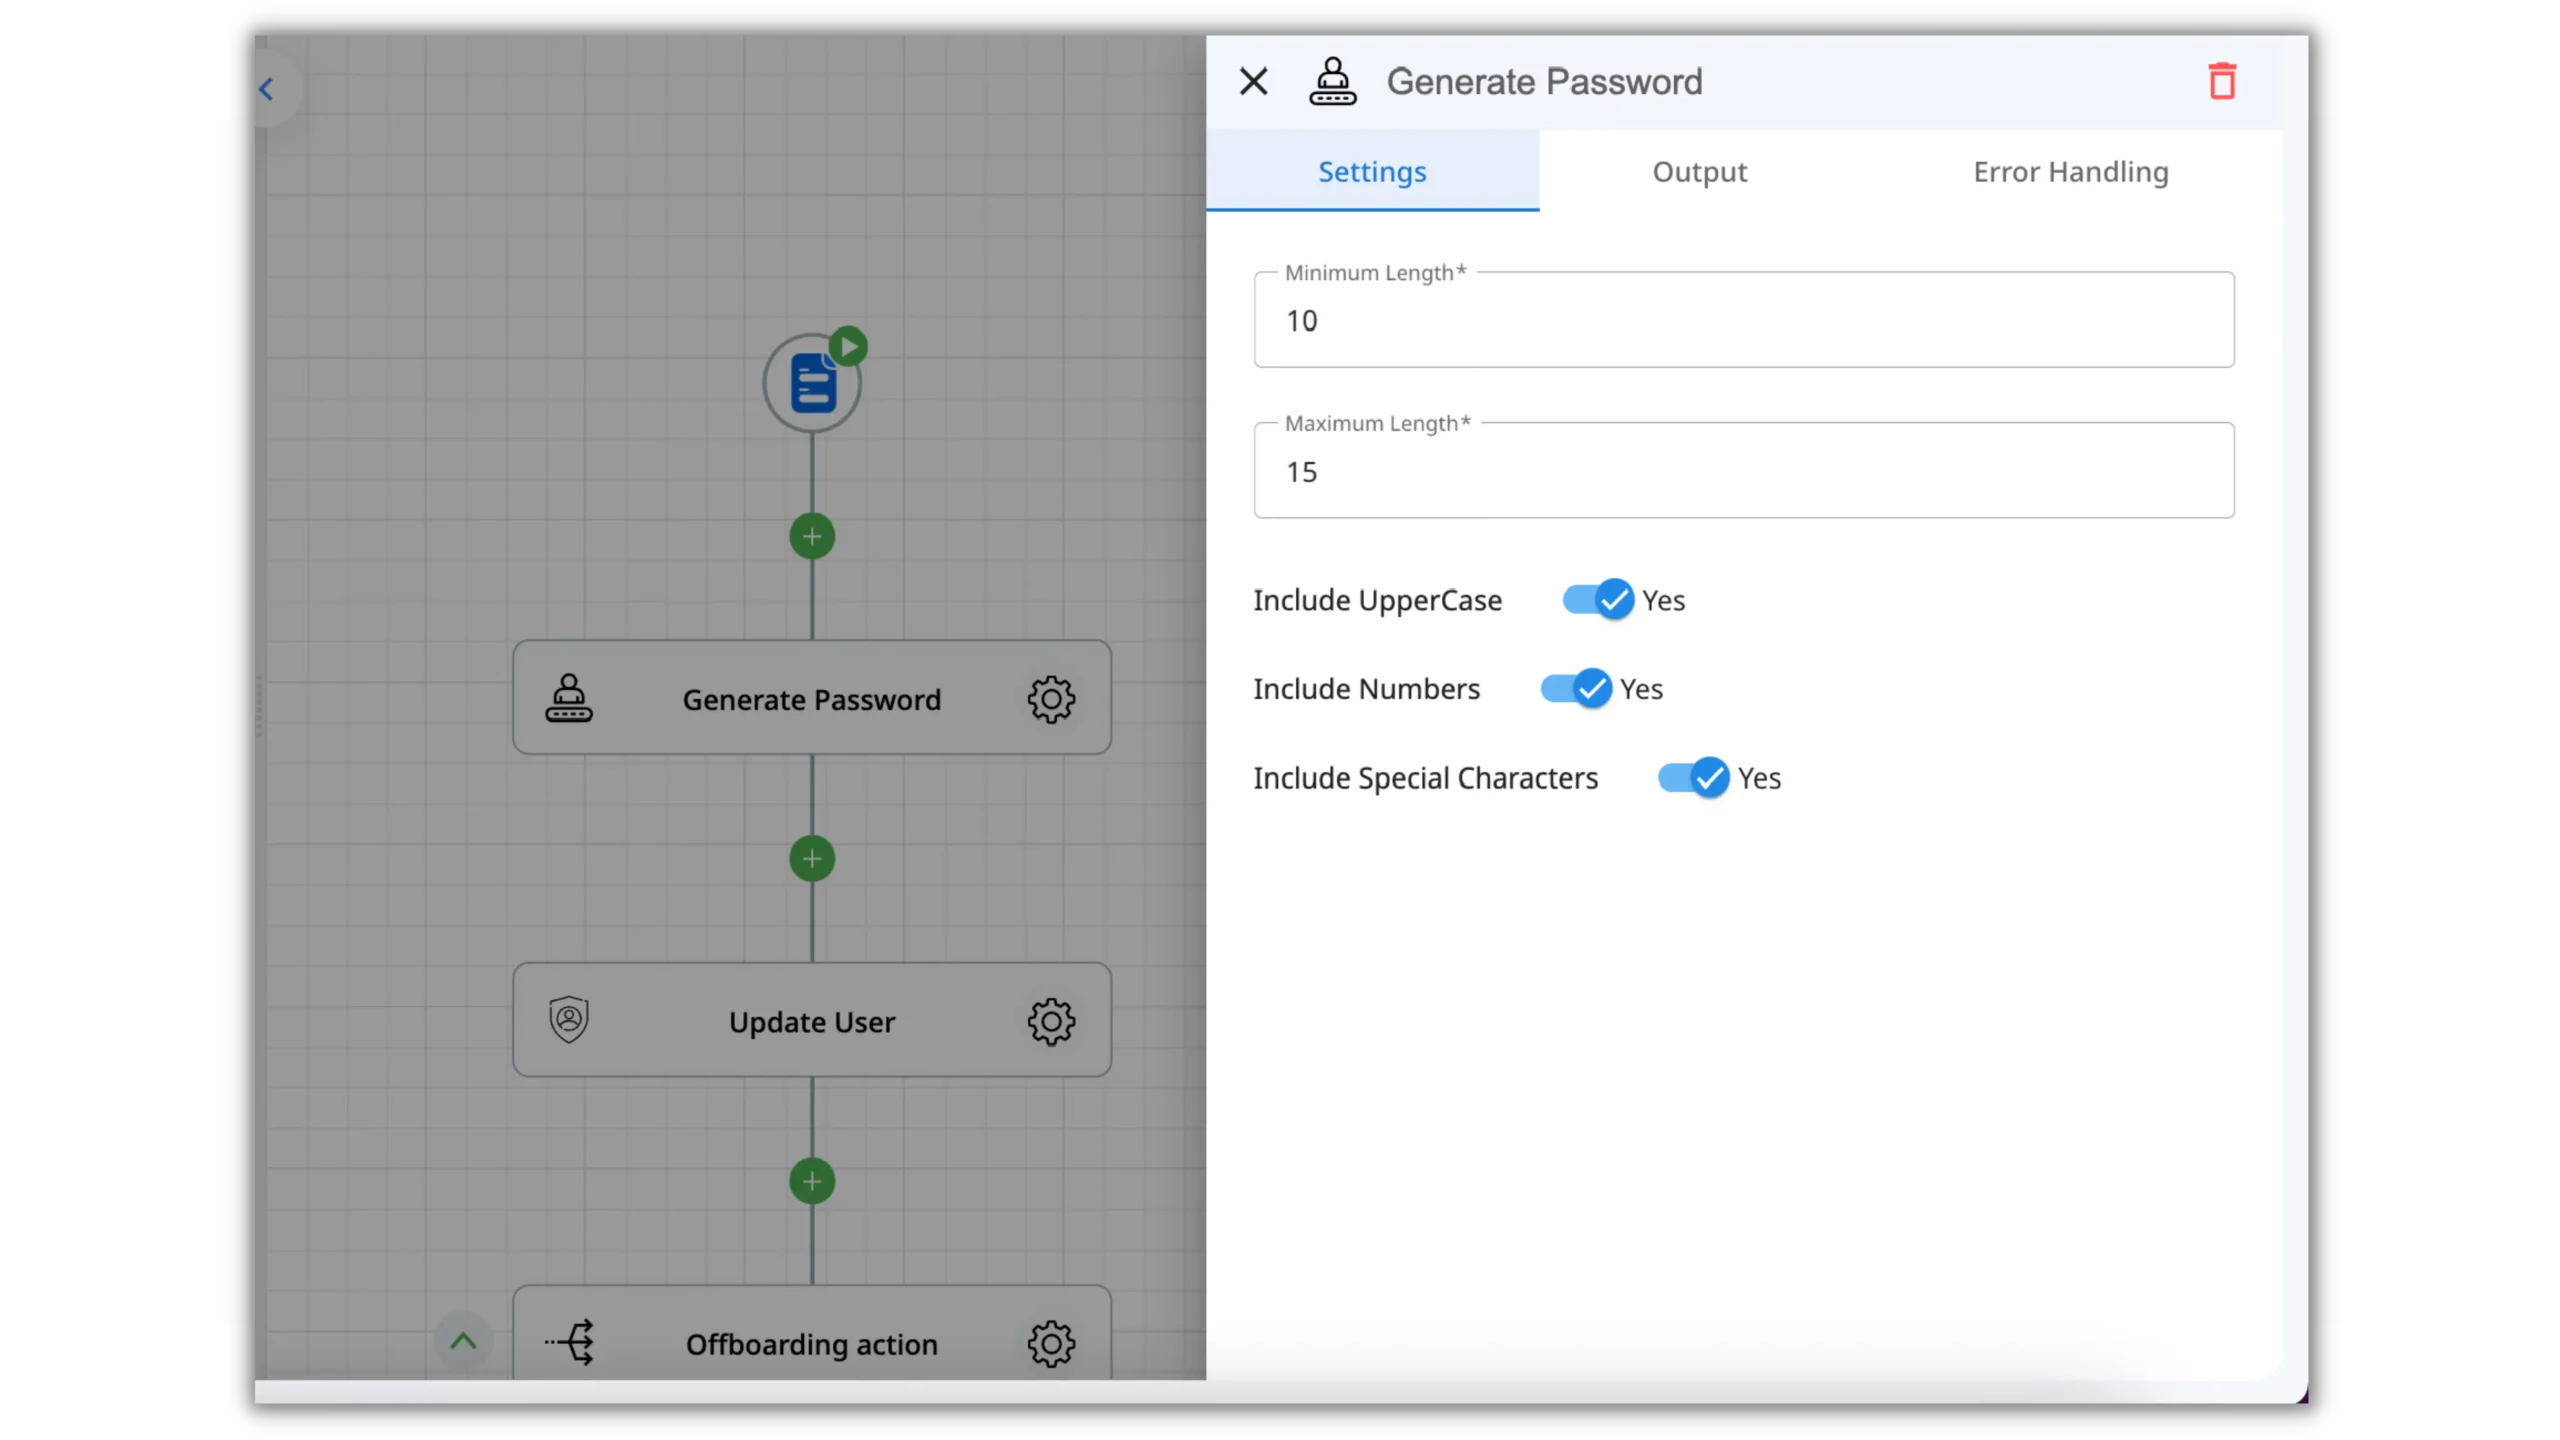 The demonstration of generating a password inside the employee onboarding automation.